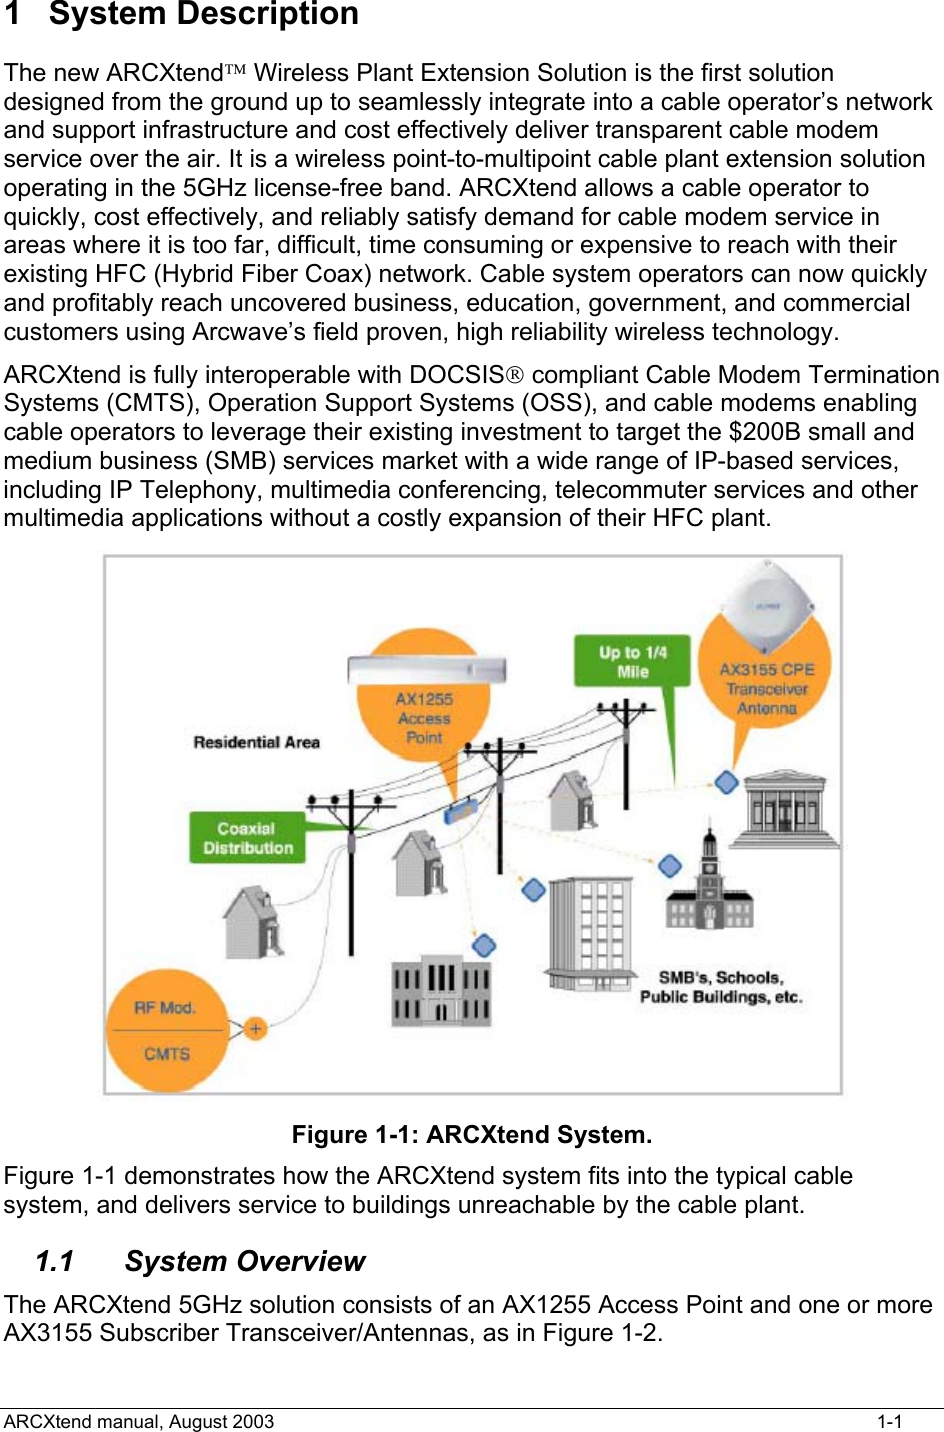  1 System Description The new ARCXtend Wireless Plant Extension Solution is the first solution designed from the ground up to seamlessly integrate into a cable operator’s network and support infrastructure and cost effectively deliver transparent cable modem service over the air. It is a wireless point-to-multipoint cable plant extension solution operating in the 5GHz license-free band. ARCXtend allows a cable operator to quickly, cost effectively, and reliably satisfy demand for cable modem service in areas where it is too far, difficult, time consuming or expensive to reach with their existing HFC (Hybrid Fiber Coax) network. Cable system operators can now quickly and profitably reach uncovered business, education, government, and commercial customers using Arcwave’s field proven, high reliability wireless technology.  ARCXtend is fully interoperable with DOCSIS compliant Cable Modem Termination Systems (CMTS), Operation Support Systems (OSS), and cable modems enabling cable operators to leverage their existing investment to target the $200B small and medium business (SMB) services market with a wide range of IP-based services, including IP Telephony, multimedia conferencing, telecommuter services and other multimedia applications without a costly expansion of their HFC plant.   Figure 1-1: ARCXtend System. Figure 1-1 demonstrates how the ARCXtend system fits into the typical cable system, and delivers service to buildings unreachable by the cable plant. 1.1 System Overview The ARCXtend 5GHz solution consists of an AX1255 Access Point and one or more AX3155 Subscriber Transceiver/Antennas, as in Figure 1-2.  ARCXtend manual, August 2003    1-1 